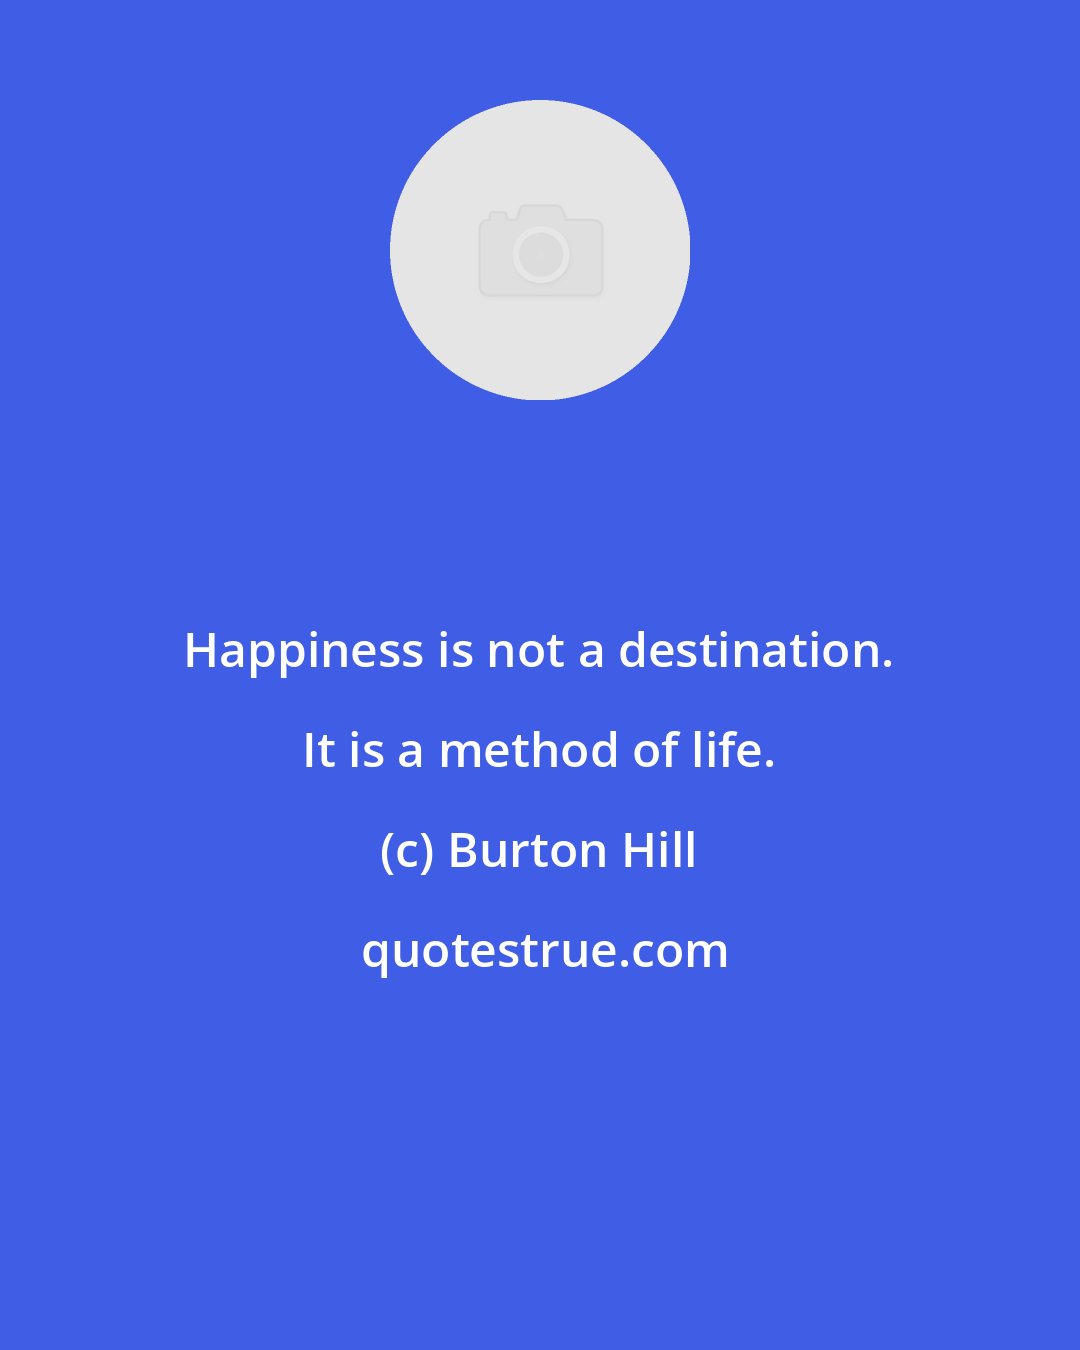 Burton Hill: Happiness is not a destination. It is a method of life.